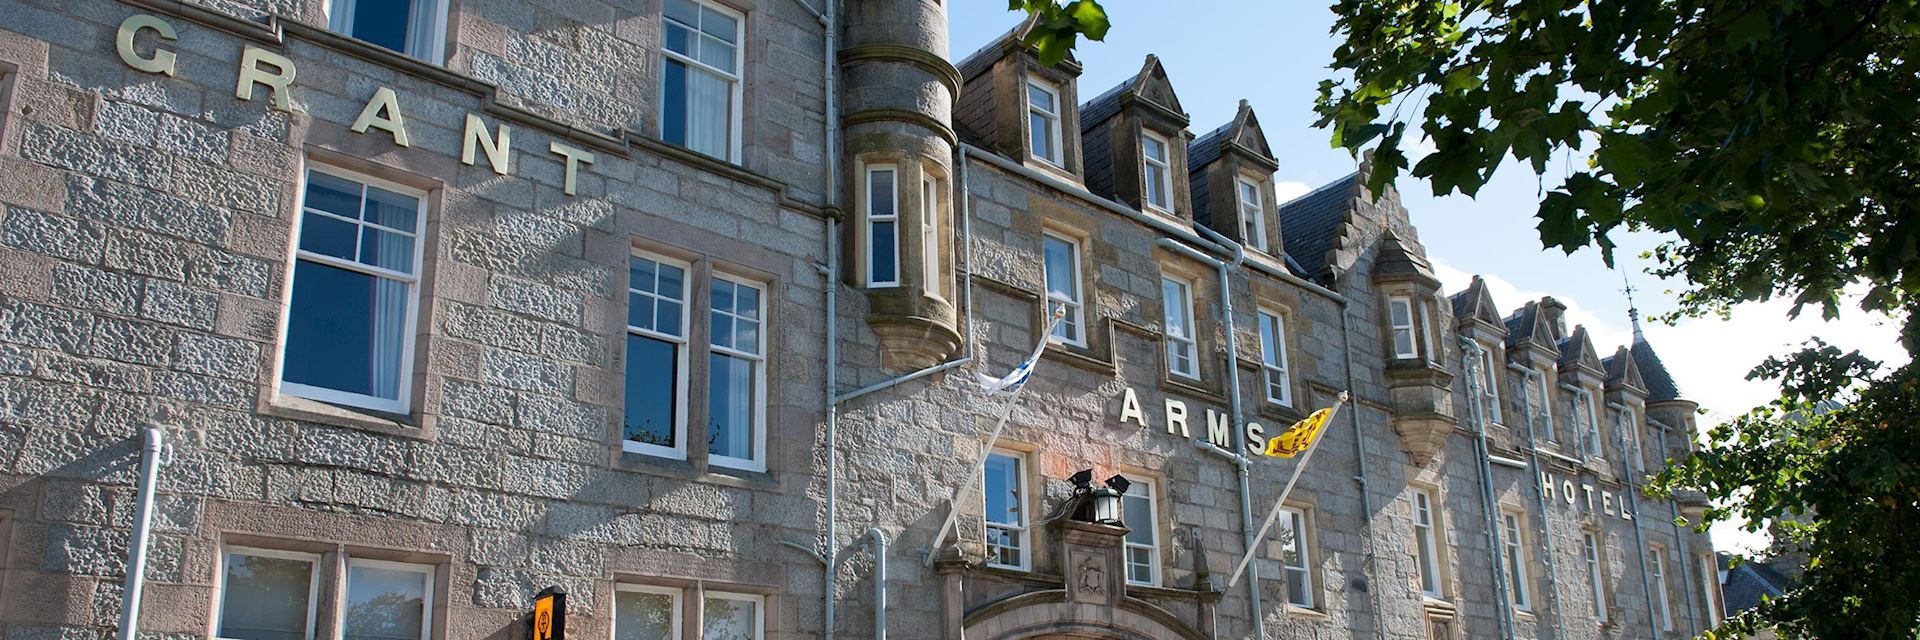 The Grant Arms Hotel, Grantown on Spey